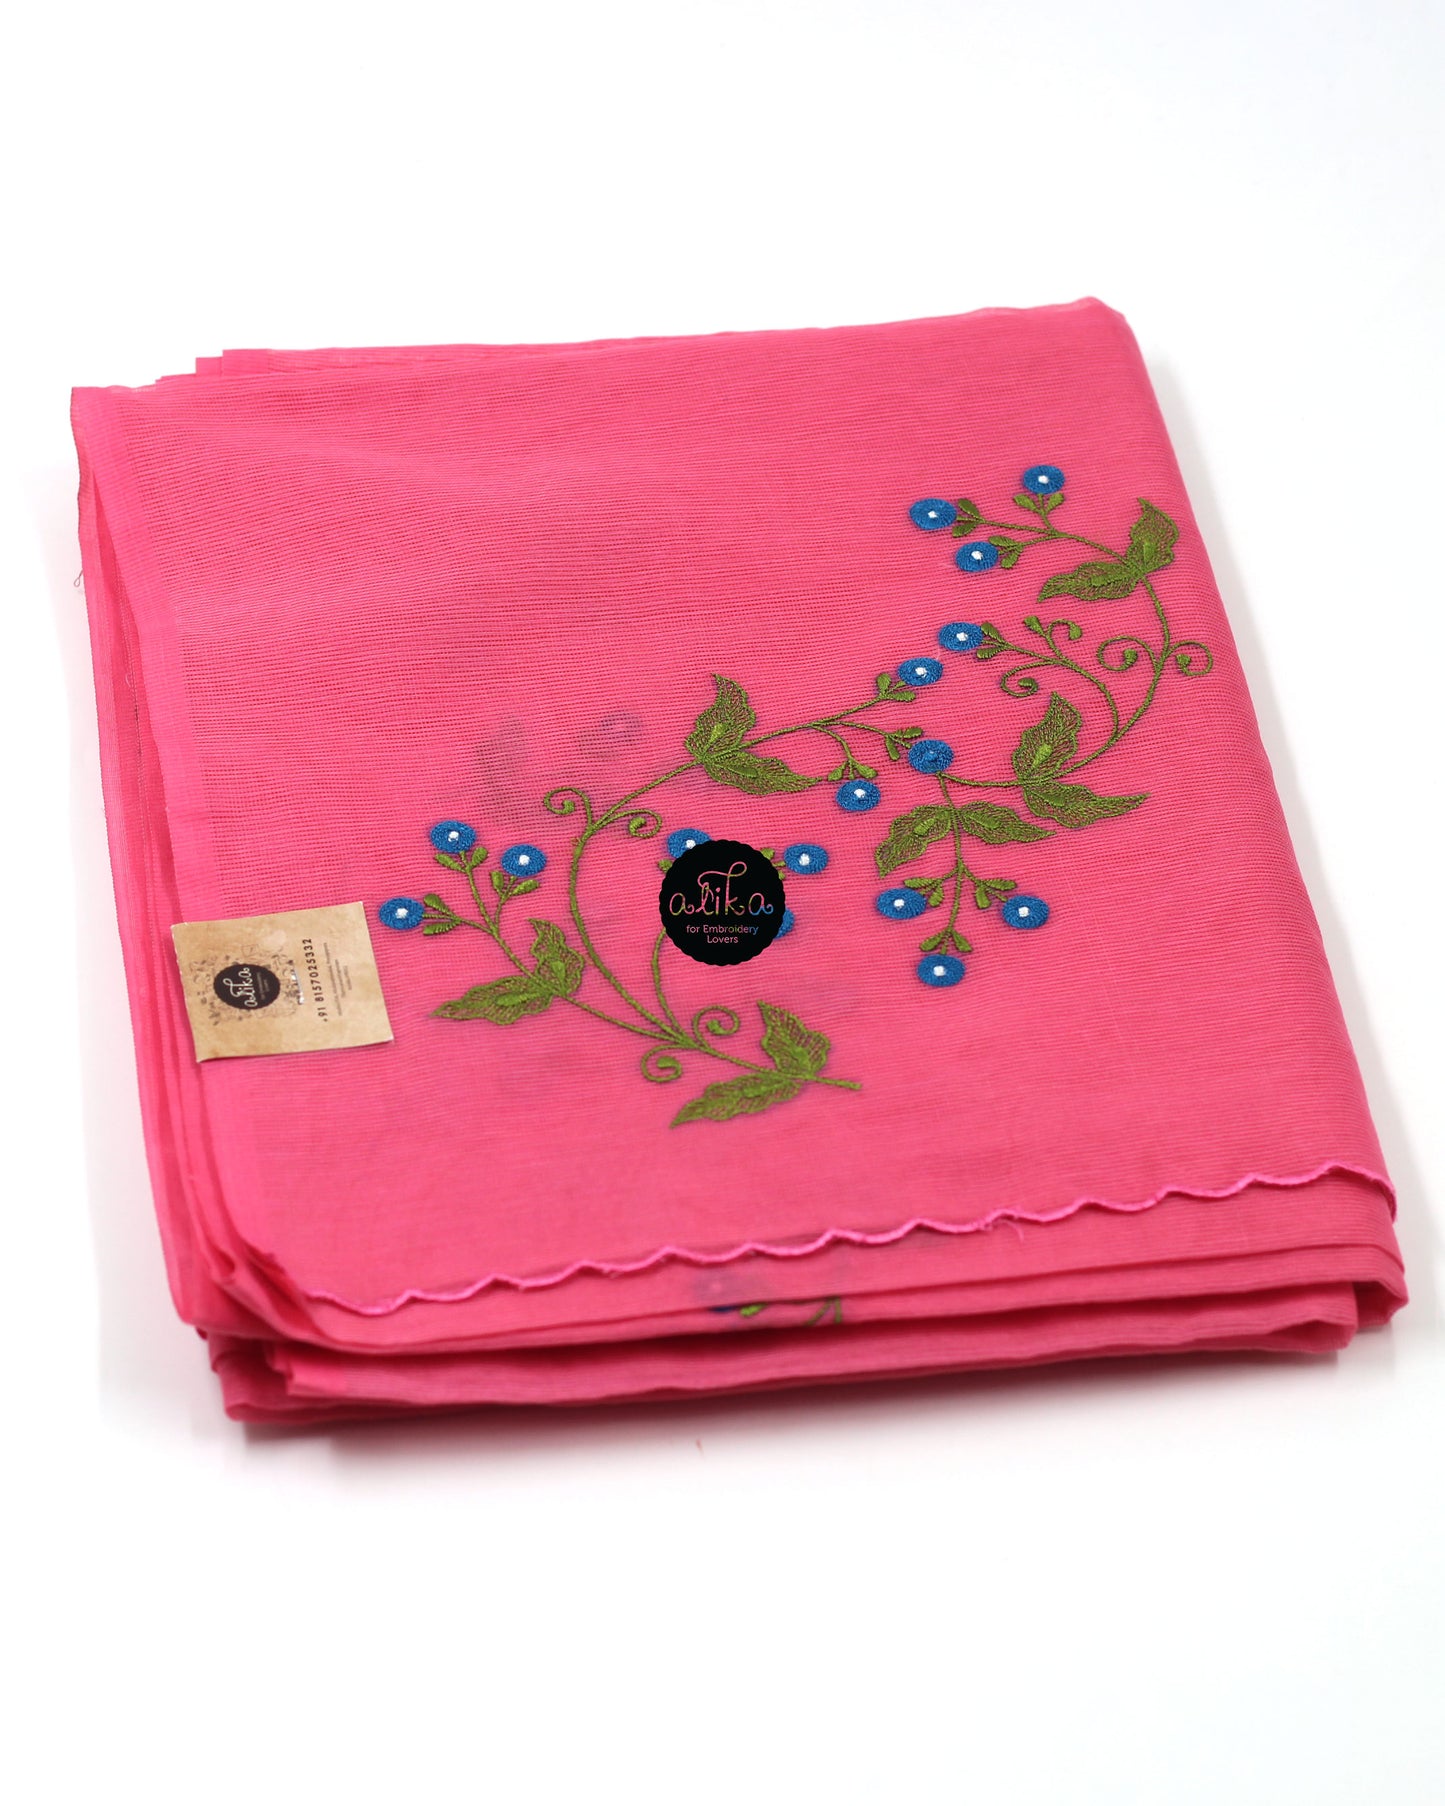 Pink  silky Kota saree with floral embroidery